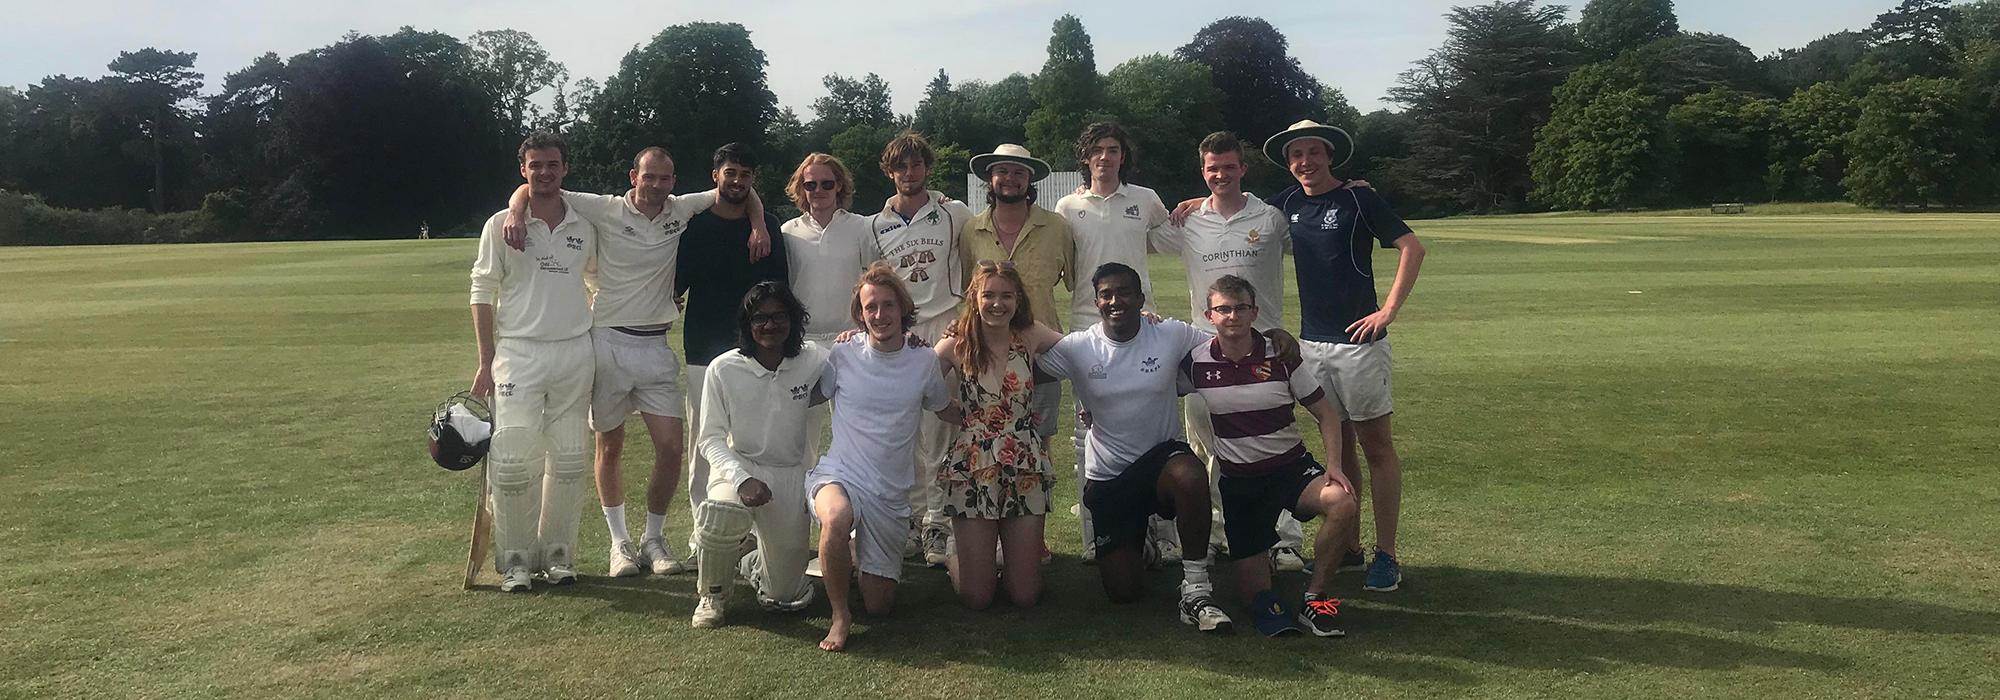 The Merton cricket team before the Cuppers final in June 2022